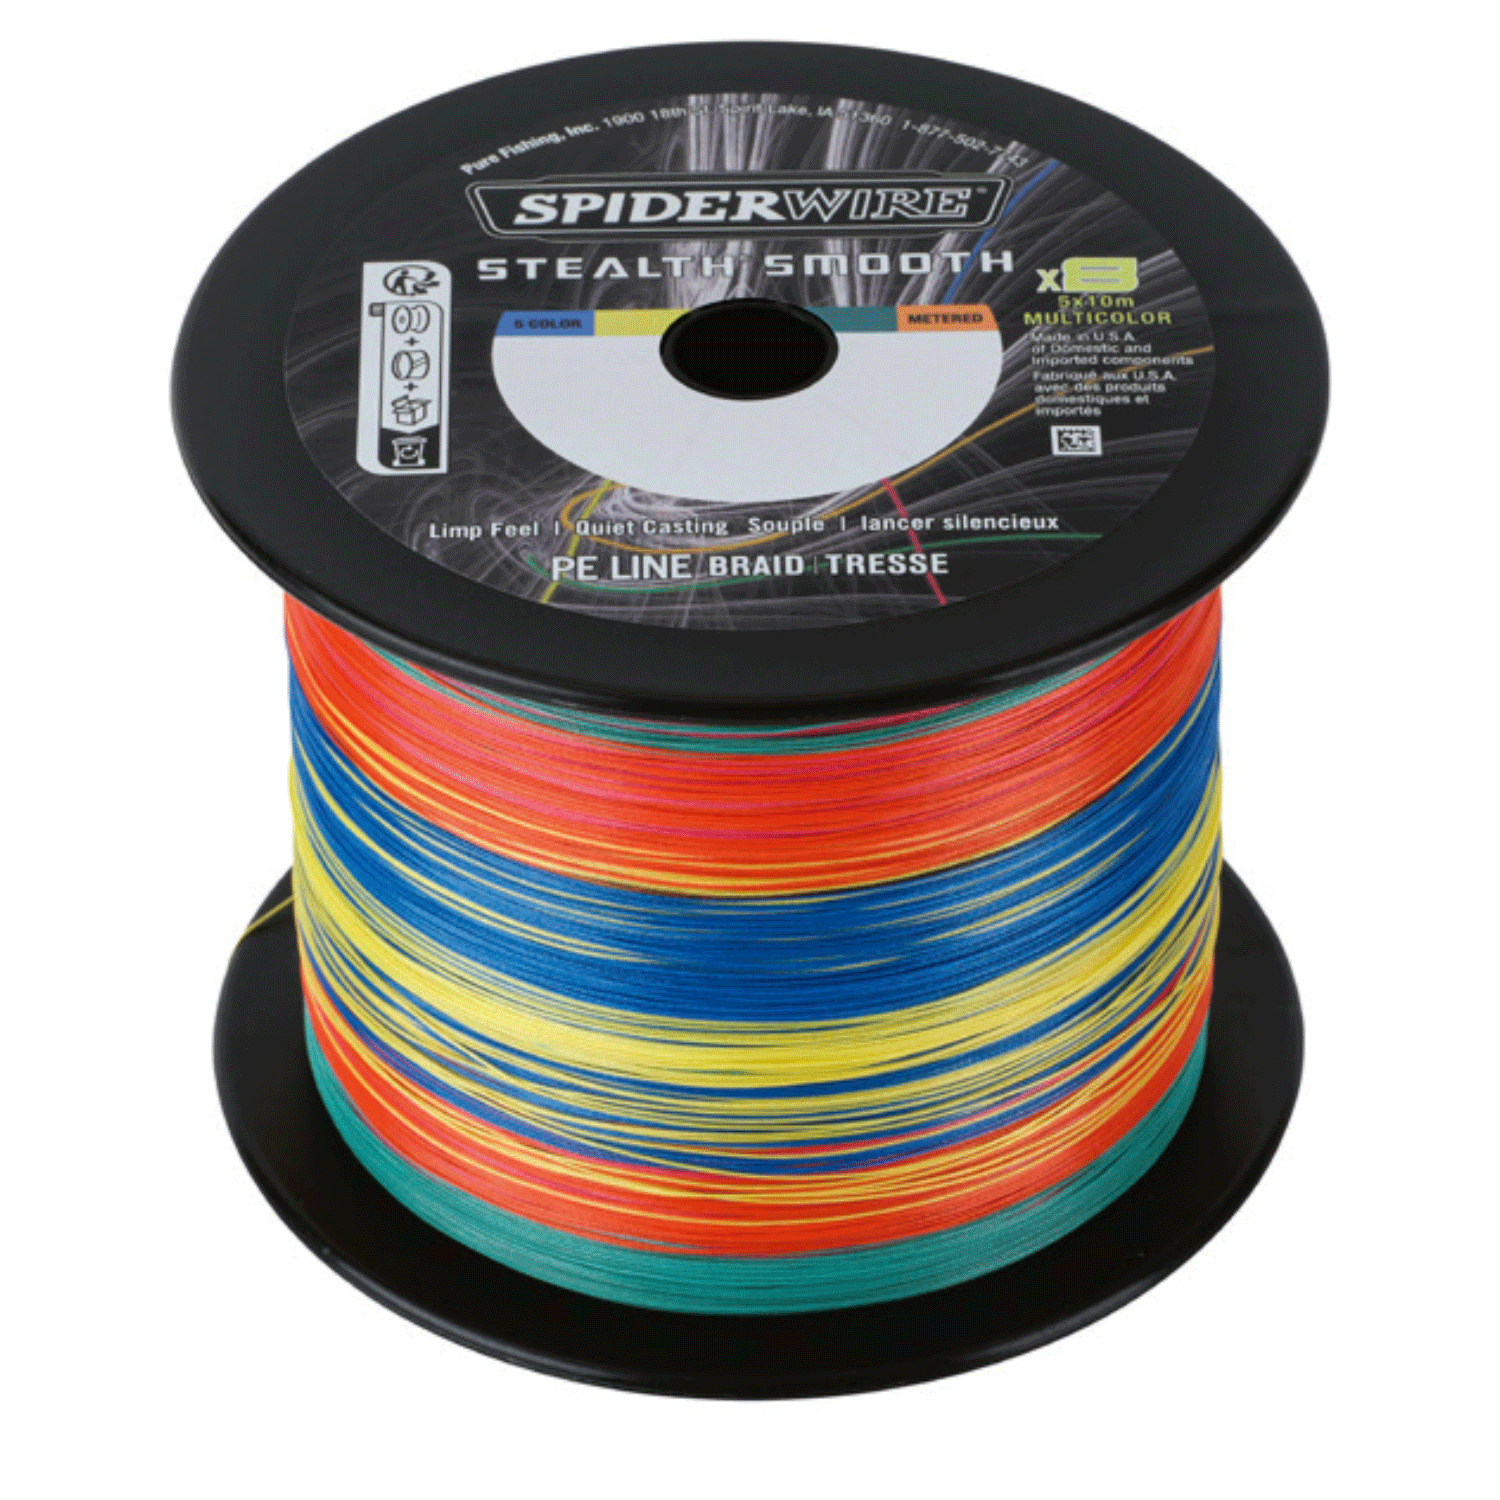 SpiderWire Stealth Smooth8 Braid - Multicolour 300m : 46.3kg – Glasgow  Angling Centre